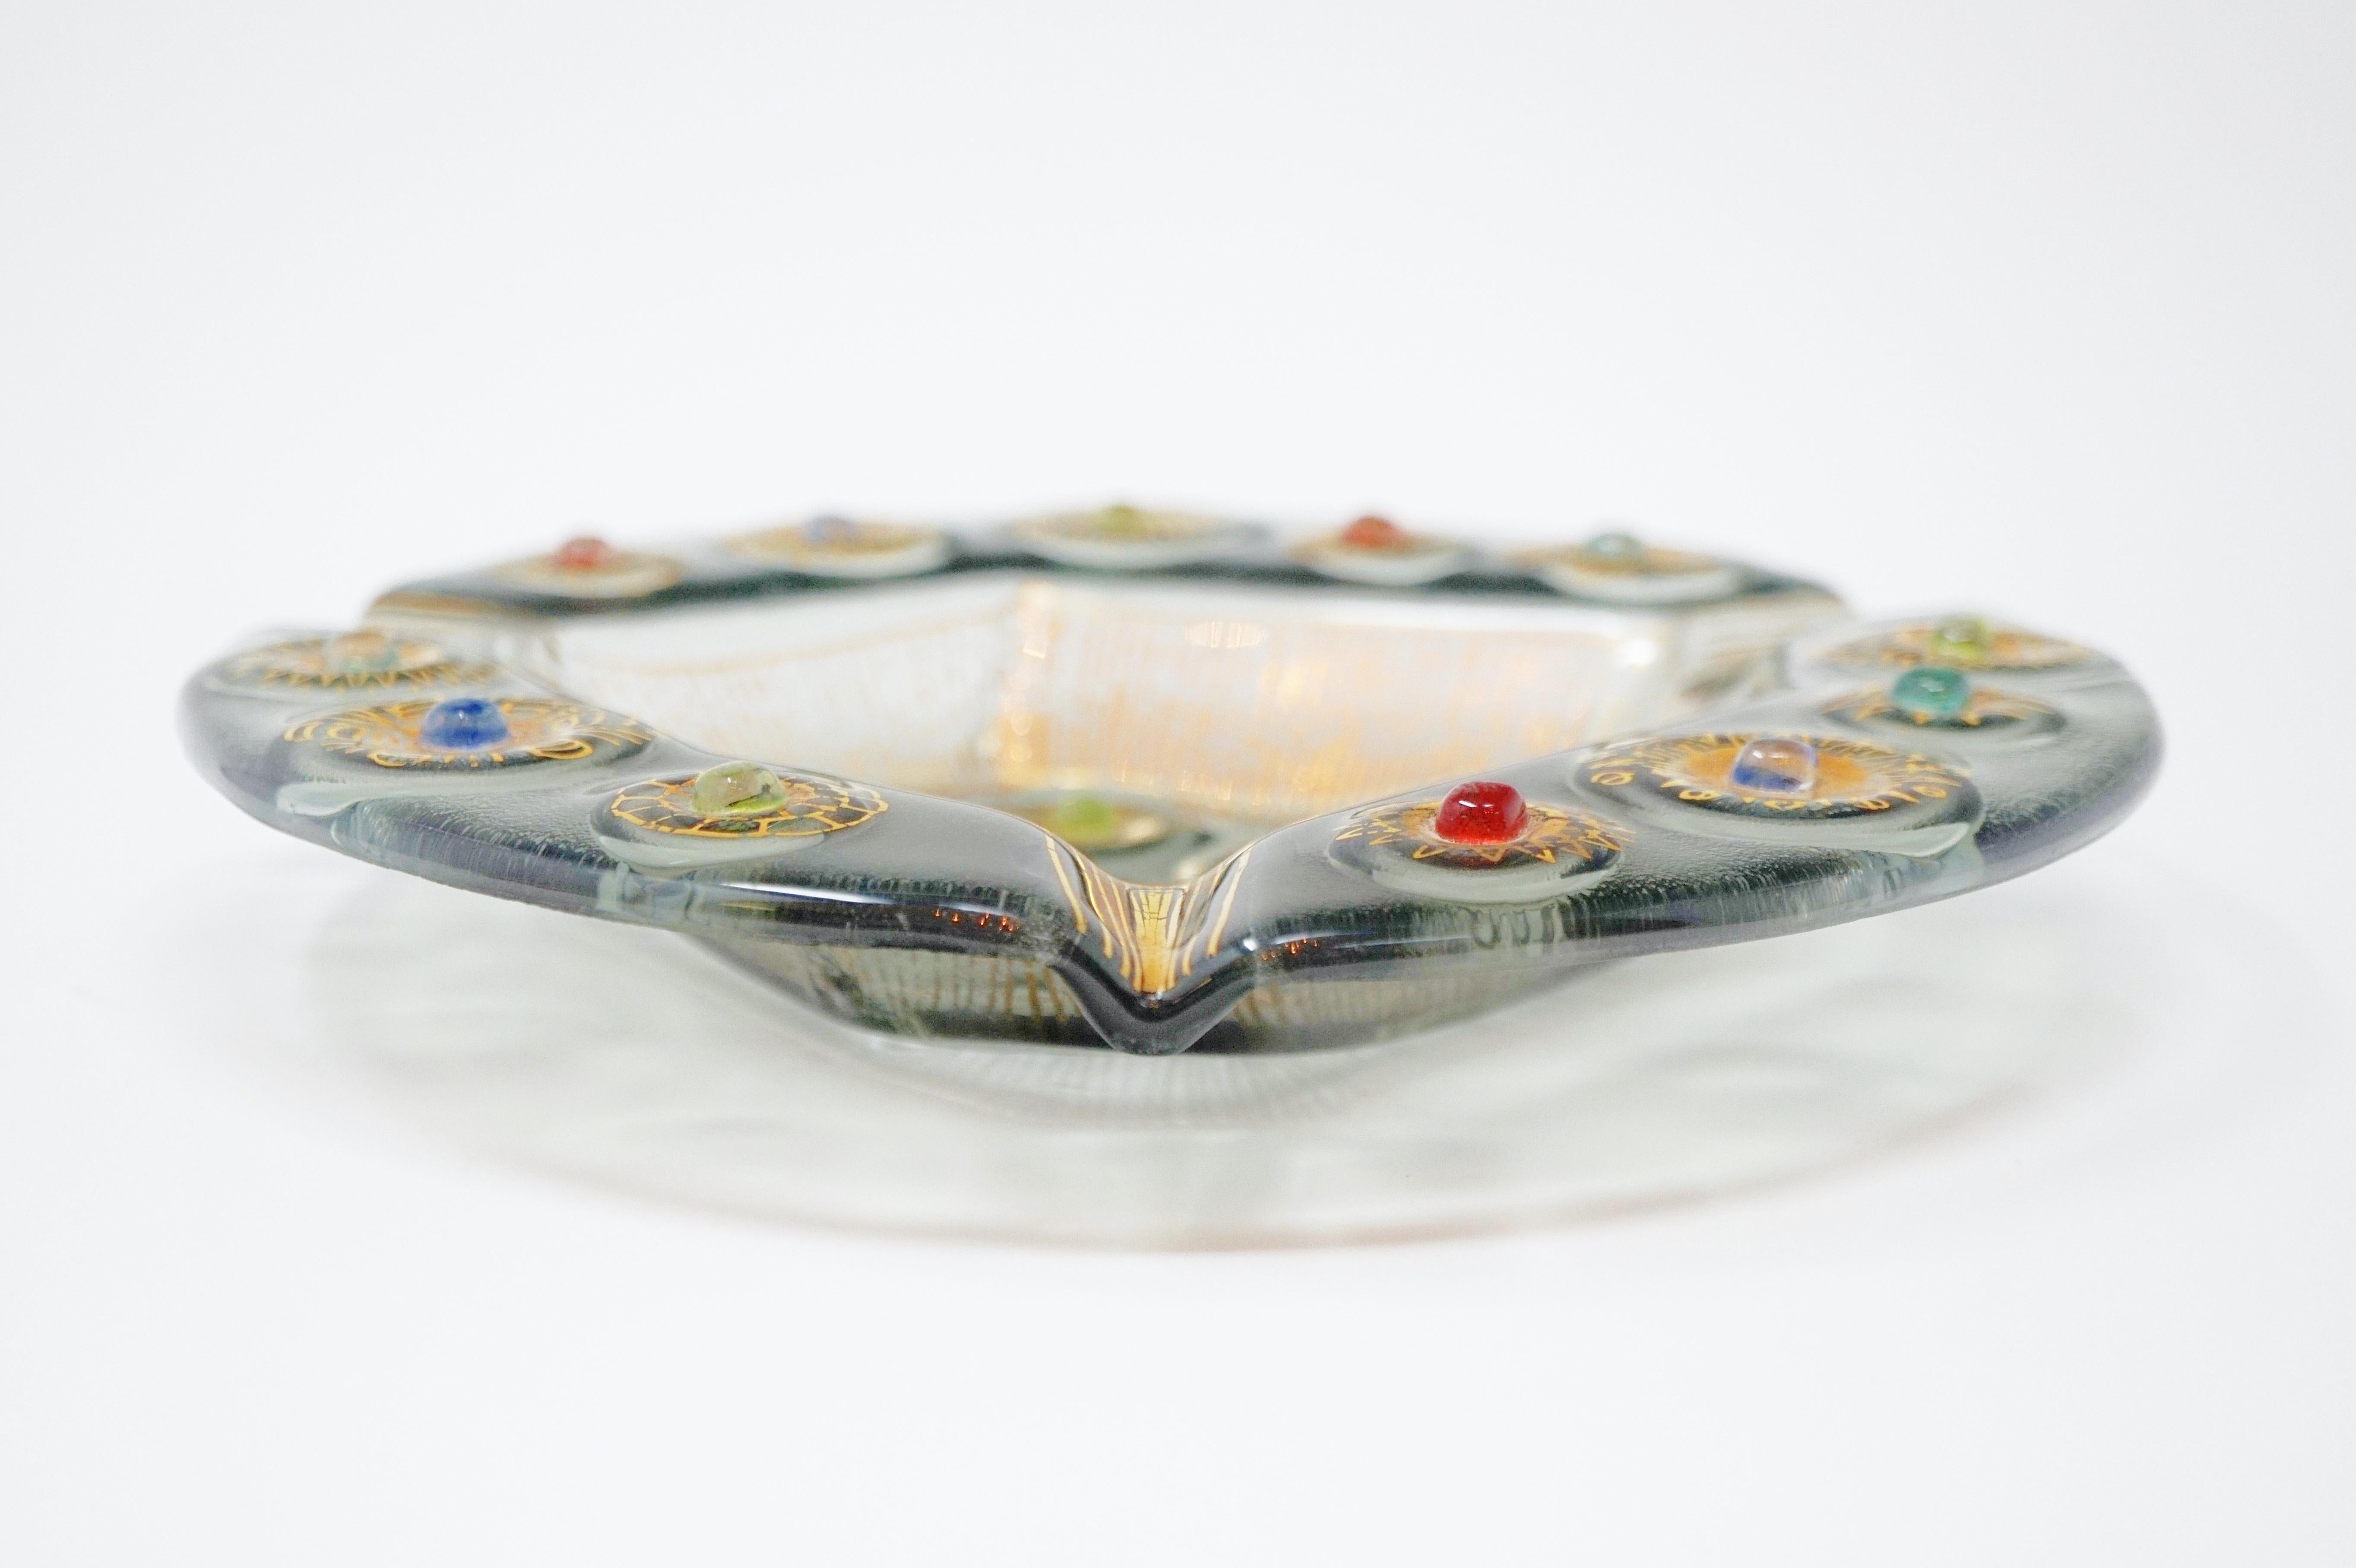 Mid-20th Century Mid-Century Modern Smoked Art Glass Ashtray by Higgins, Signed, circa 1950s